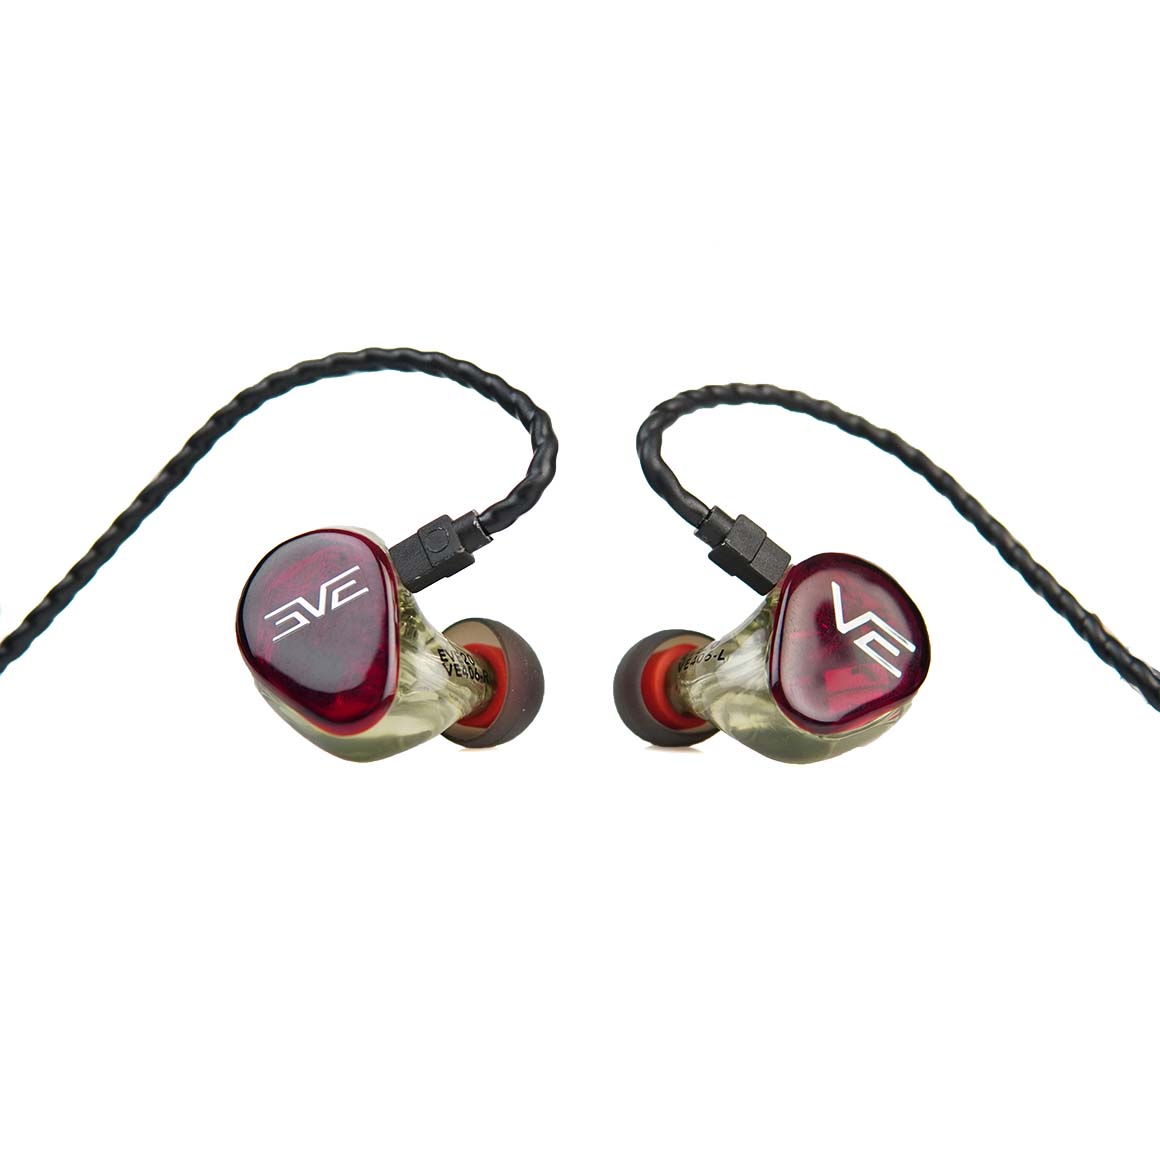 Vision Ears EVE Universal In-Ear Monitors (Demo Unit)